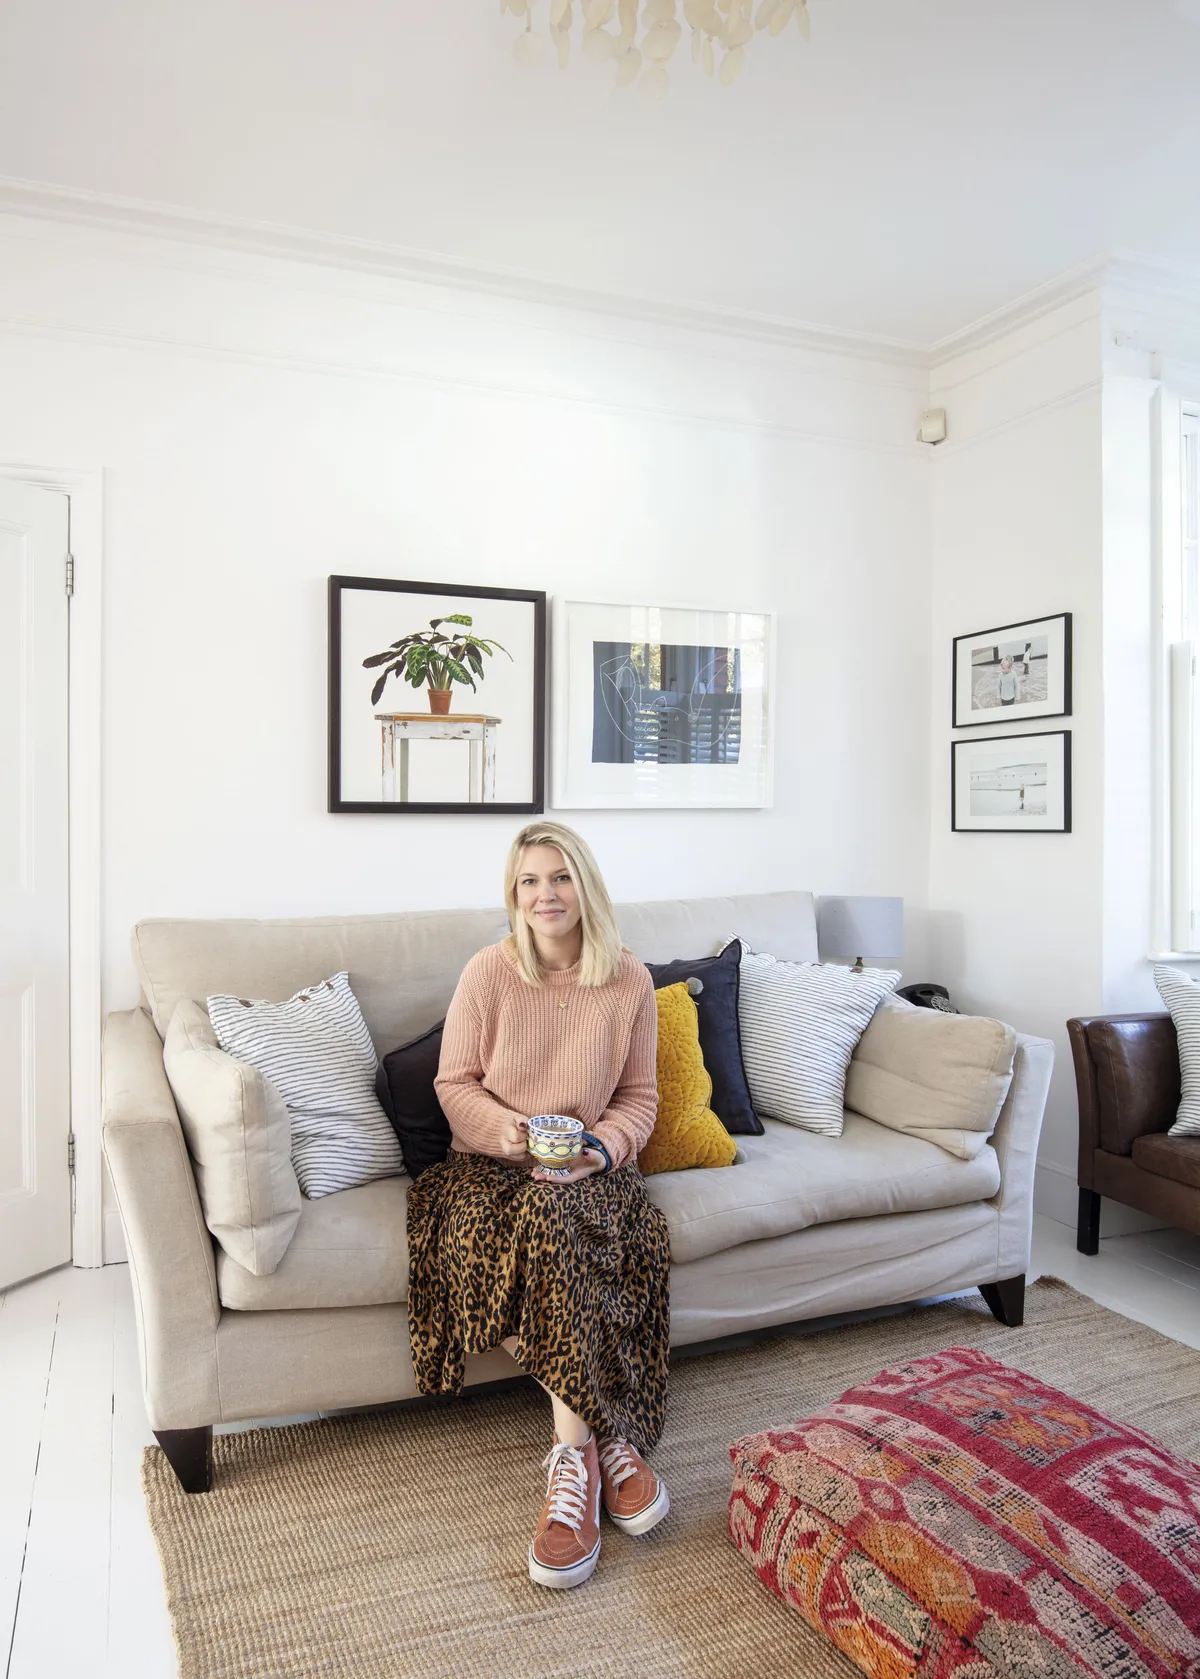 Relaxing with Scandi overtones is the feeling Polly was trying to create in the living room area and her Lombok sofas, cushions from Projekti Tyyny and neutral rug from IKEA tie in with the shutters made locally at Nigel Hare Joinery